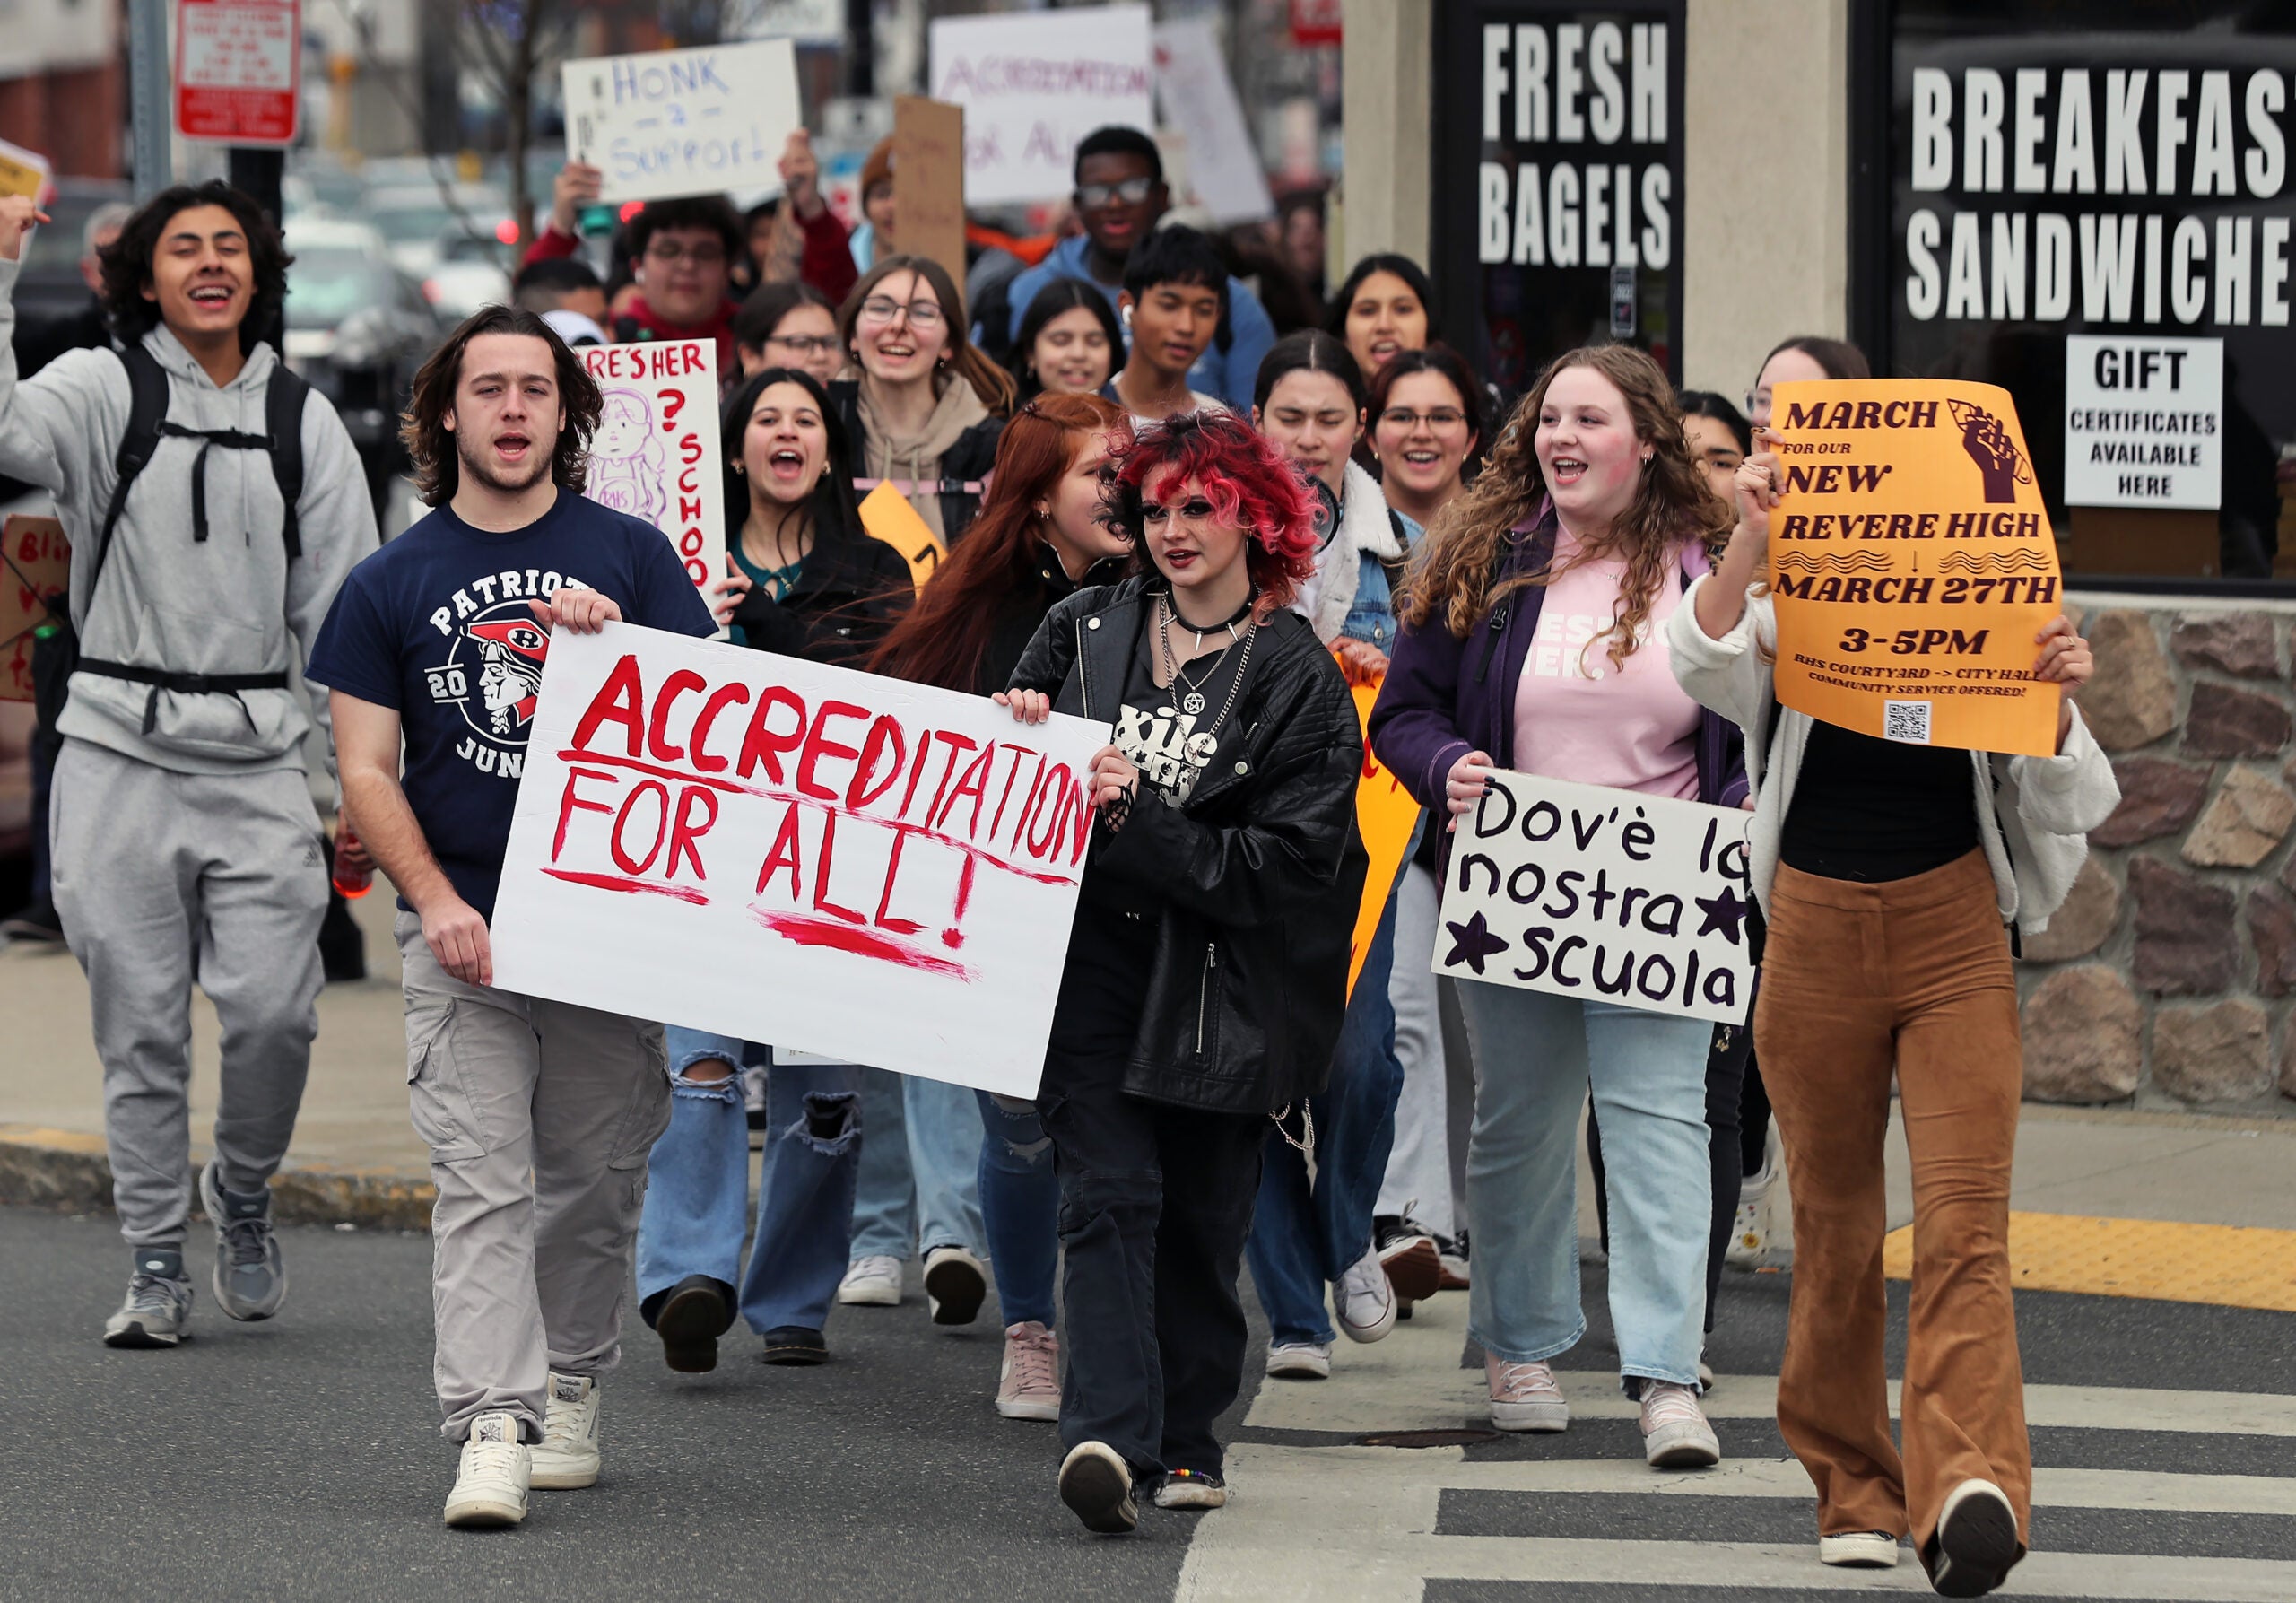 Revere High School students are pictured holding up protest signs in mid-March.